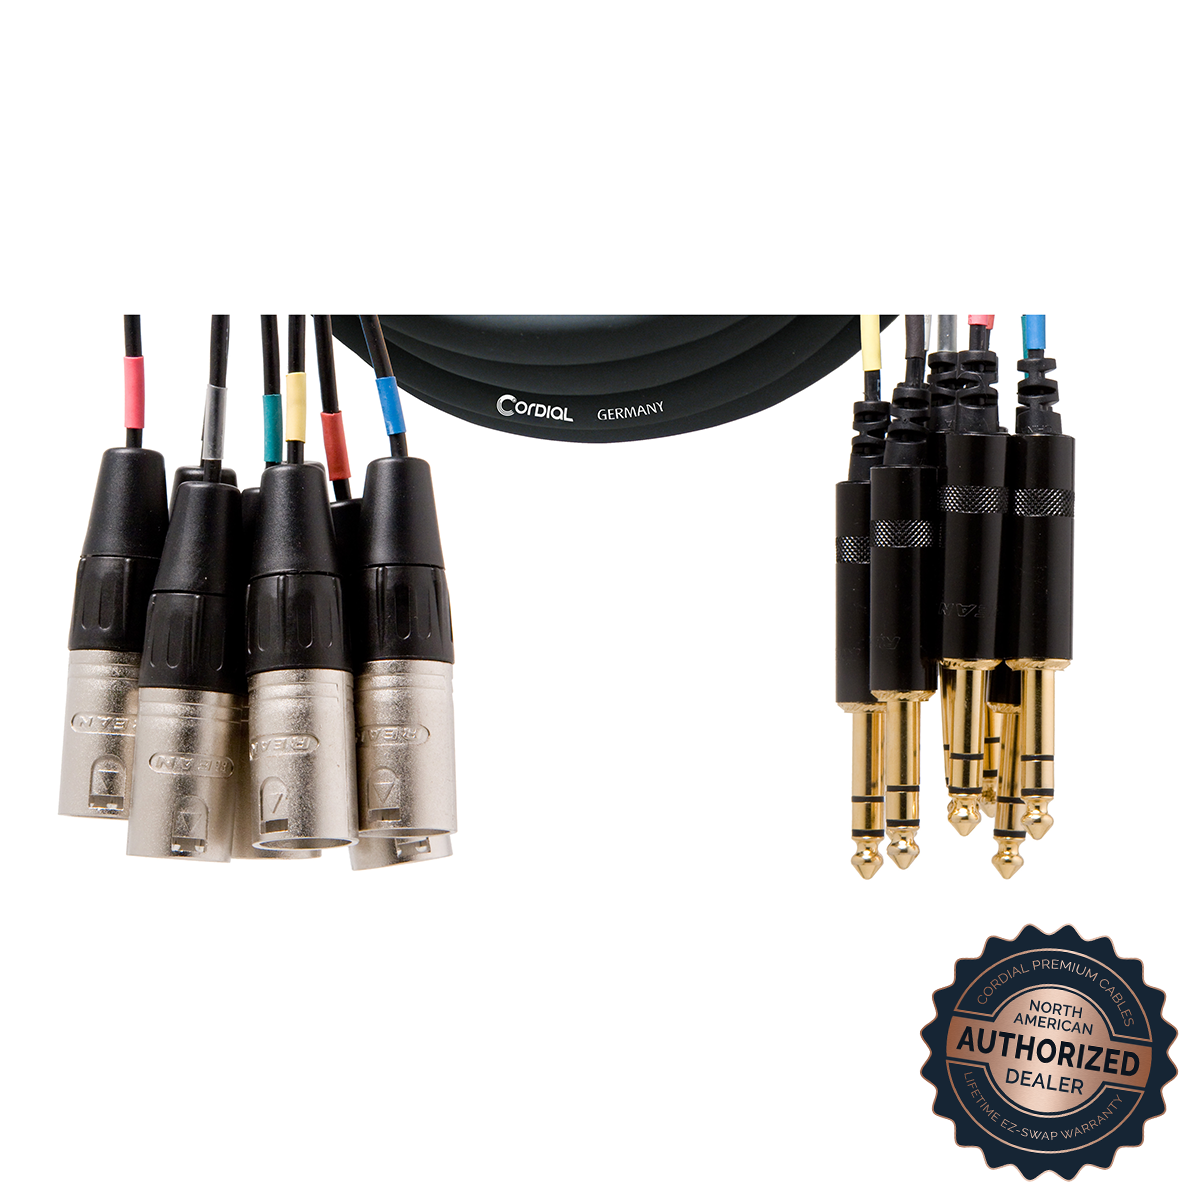 Cordial 8-Channel Balanced Multicore Cable Loom; 10ft.

CML 8-0 MV 3 C

(8x) XLR Male to (8x) 1/4" TRS Male; 10ft